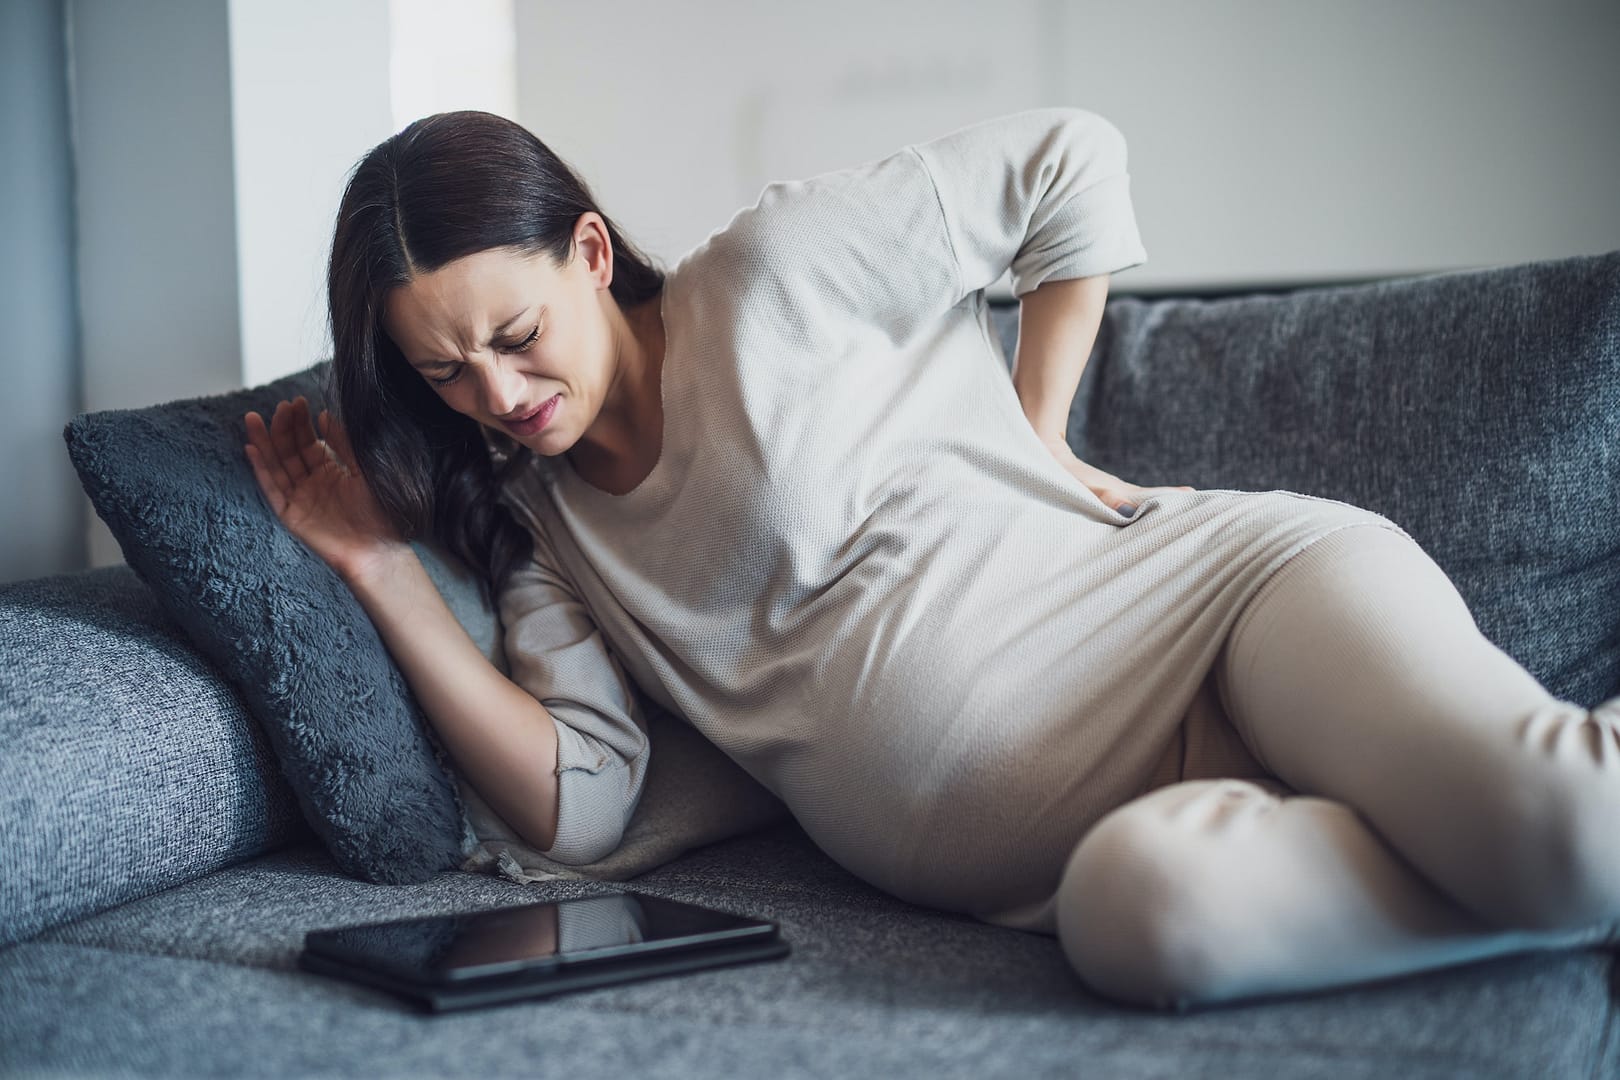 Back pain in pregnancy The Back Pain project Stamford, Darien Norwalk and New Canaan helps